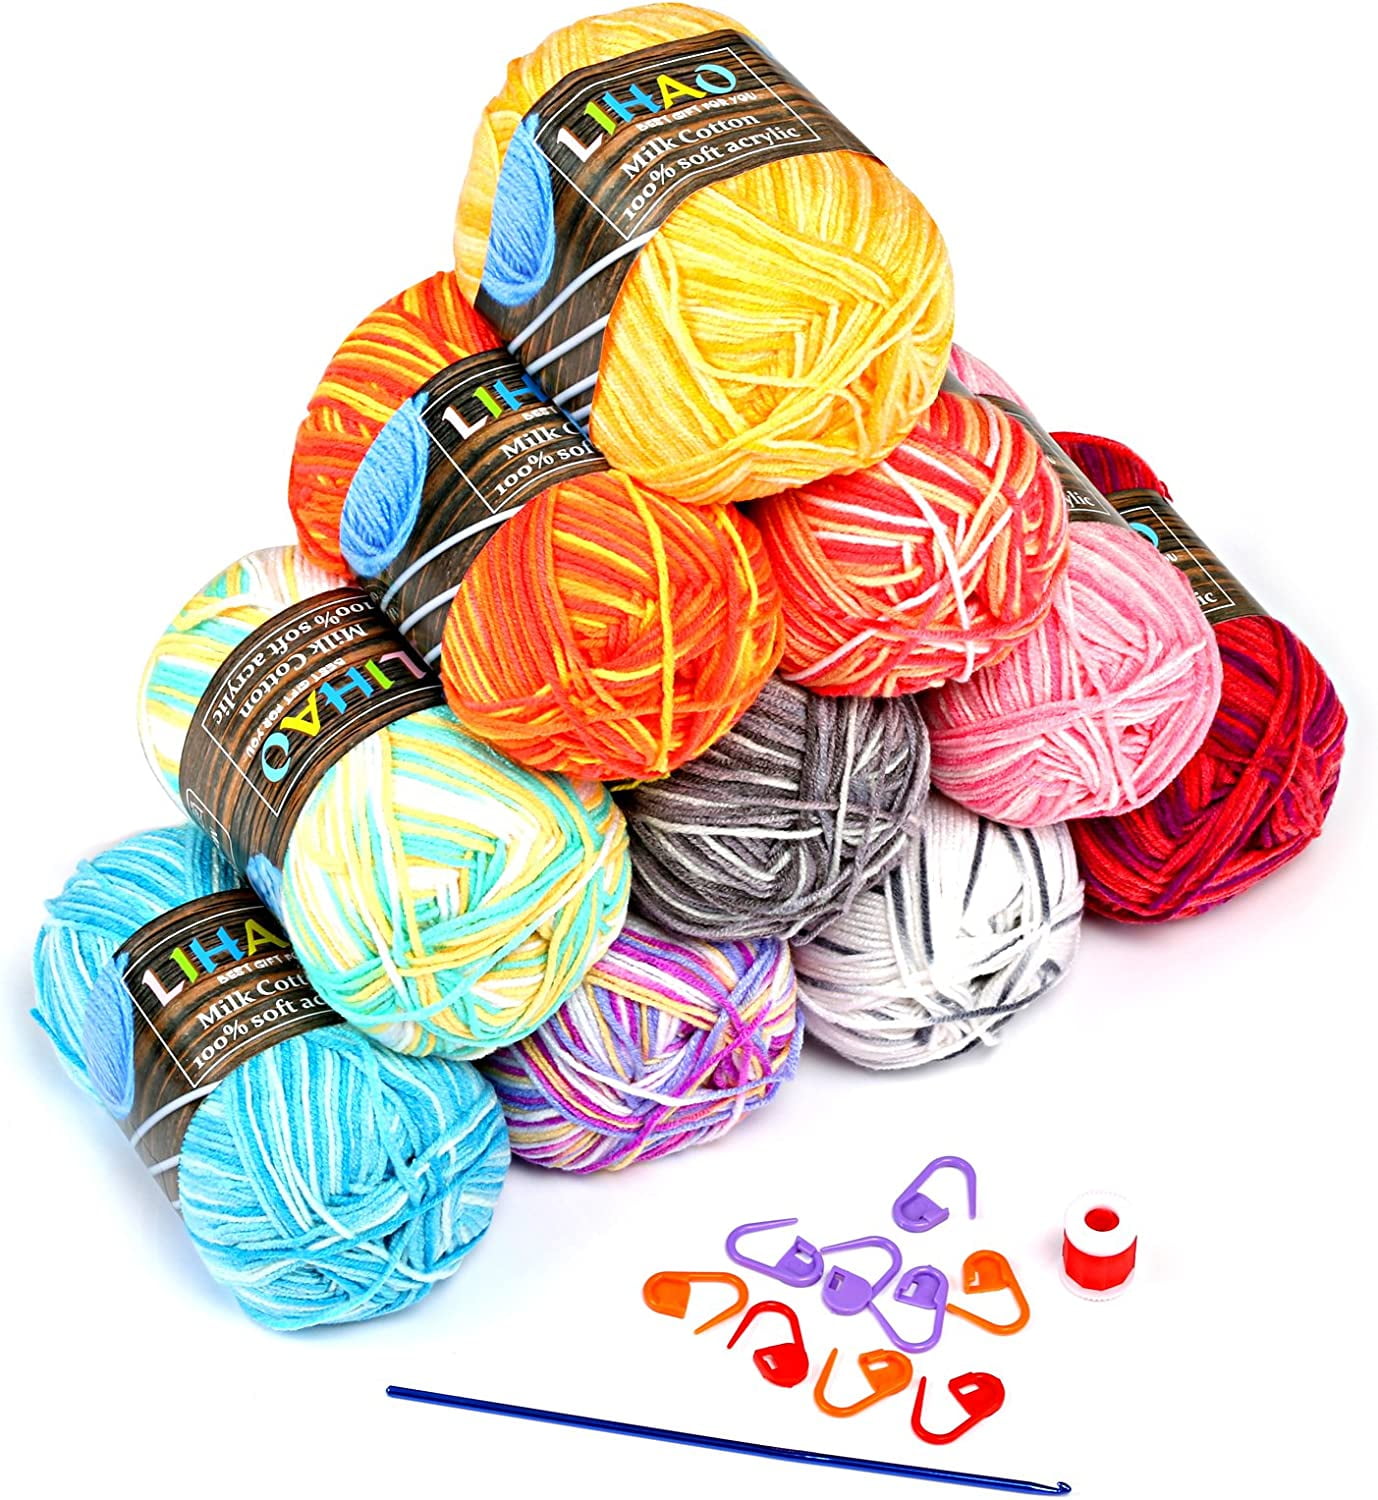 Pack of 10, 50g Soft Cotton Yarn Skeins for Crochet and Knitting, 1200+yard